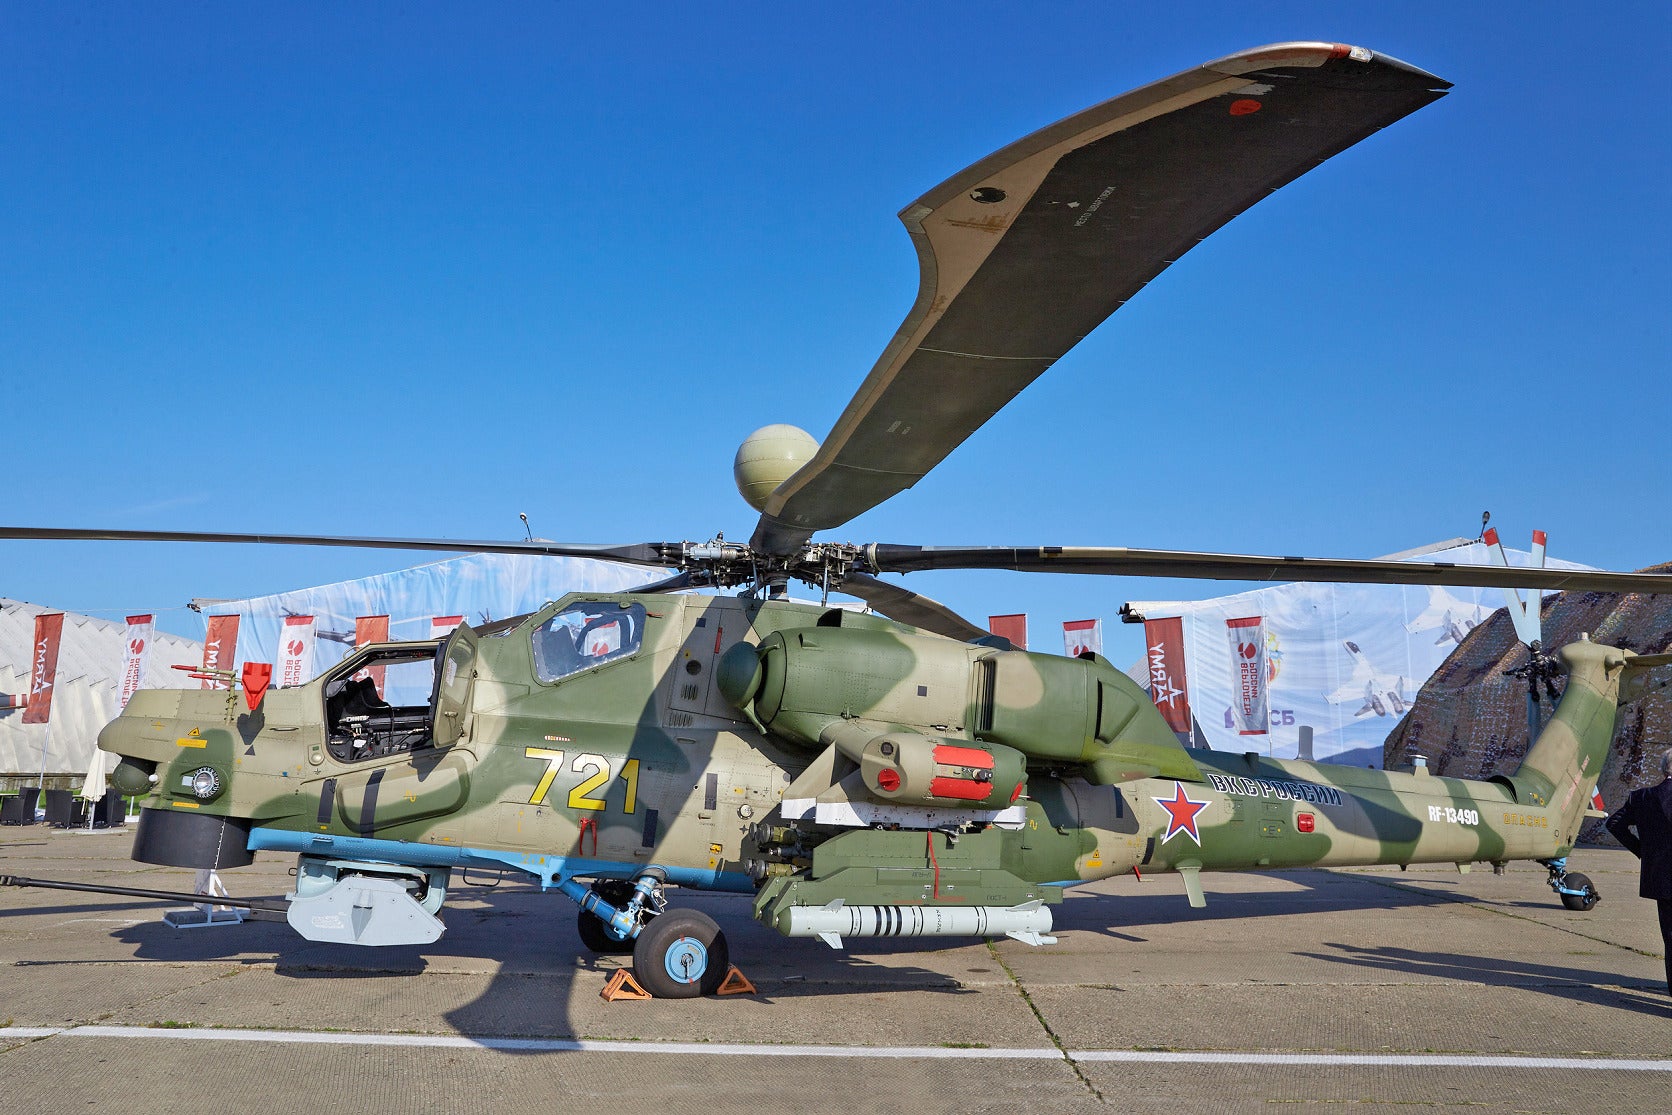 11-Mi-28NM-with-LMUR-305E-missile-at-Armiya-2021cRussian-Defence-Ministry.jpg